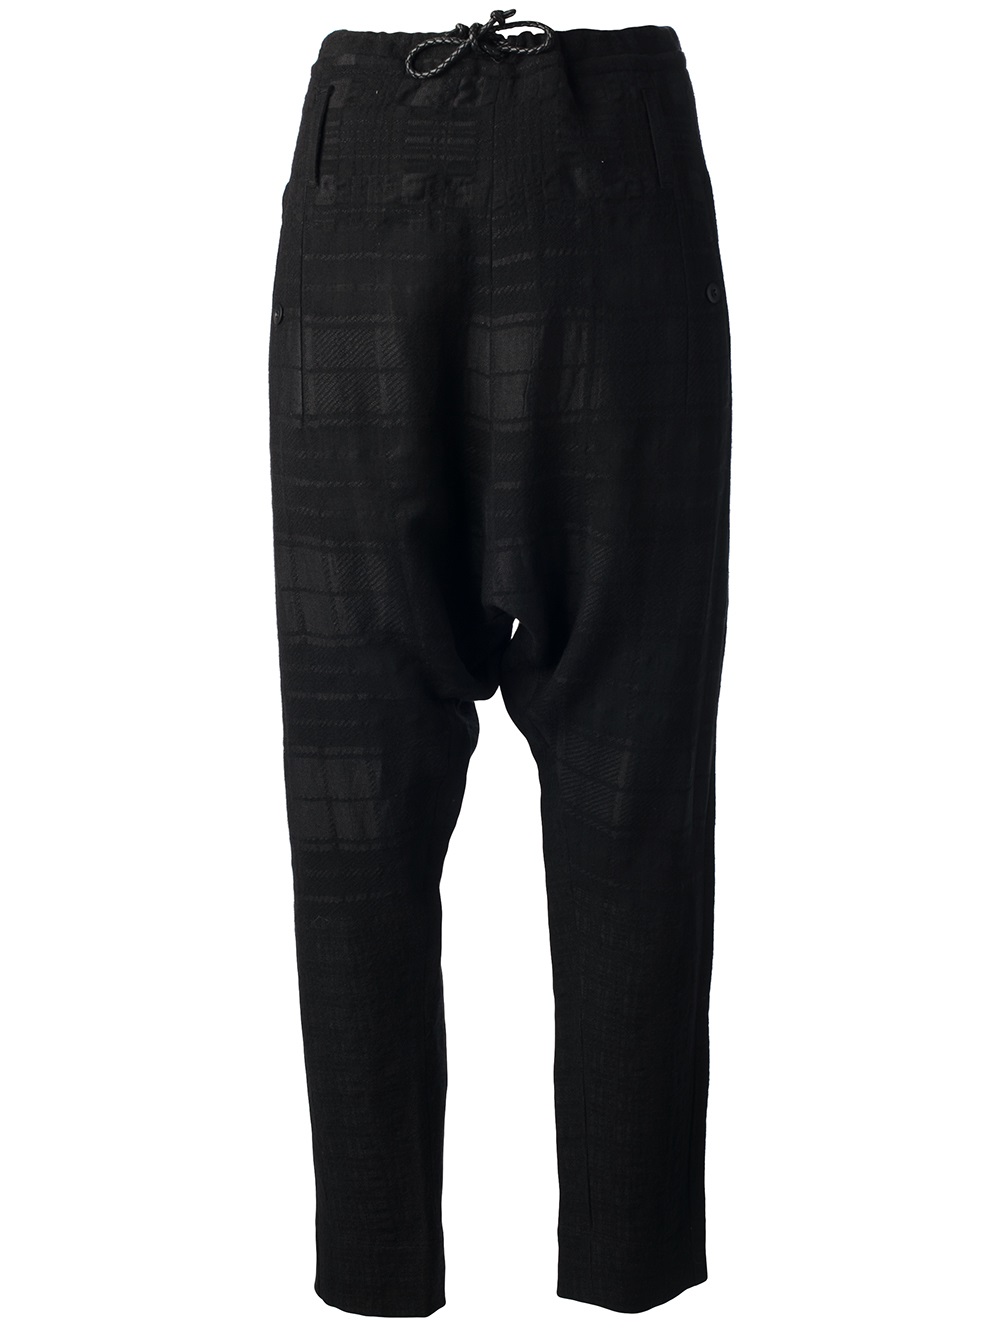 Lyst - Lost & Found Ease Trouser in Black